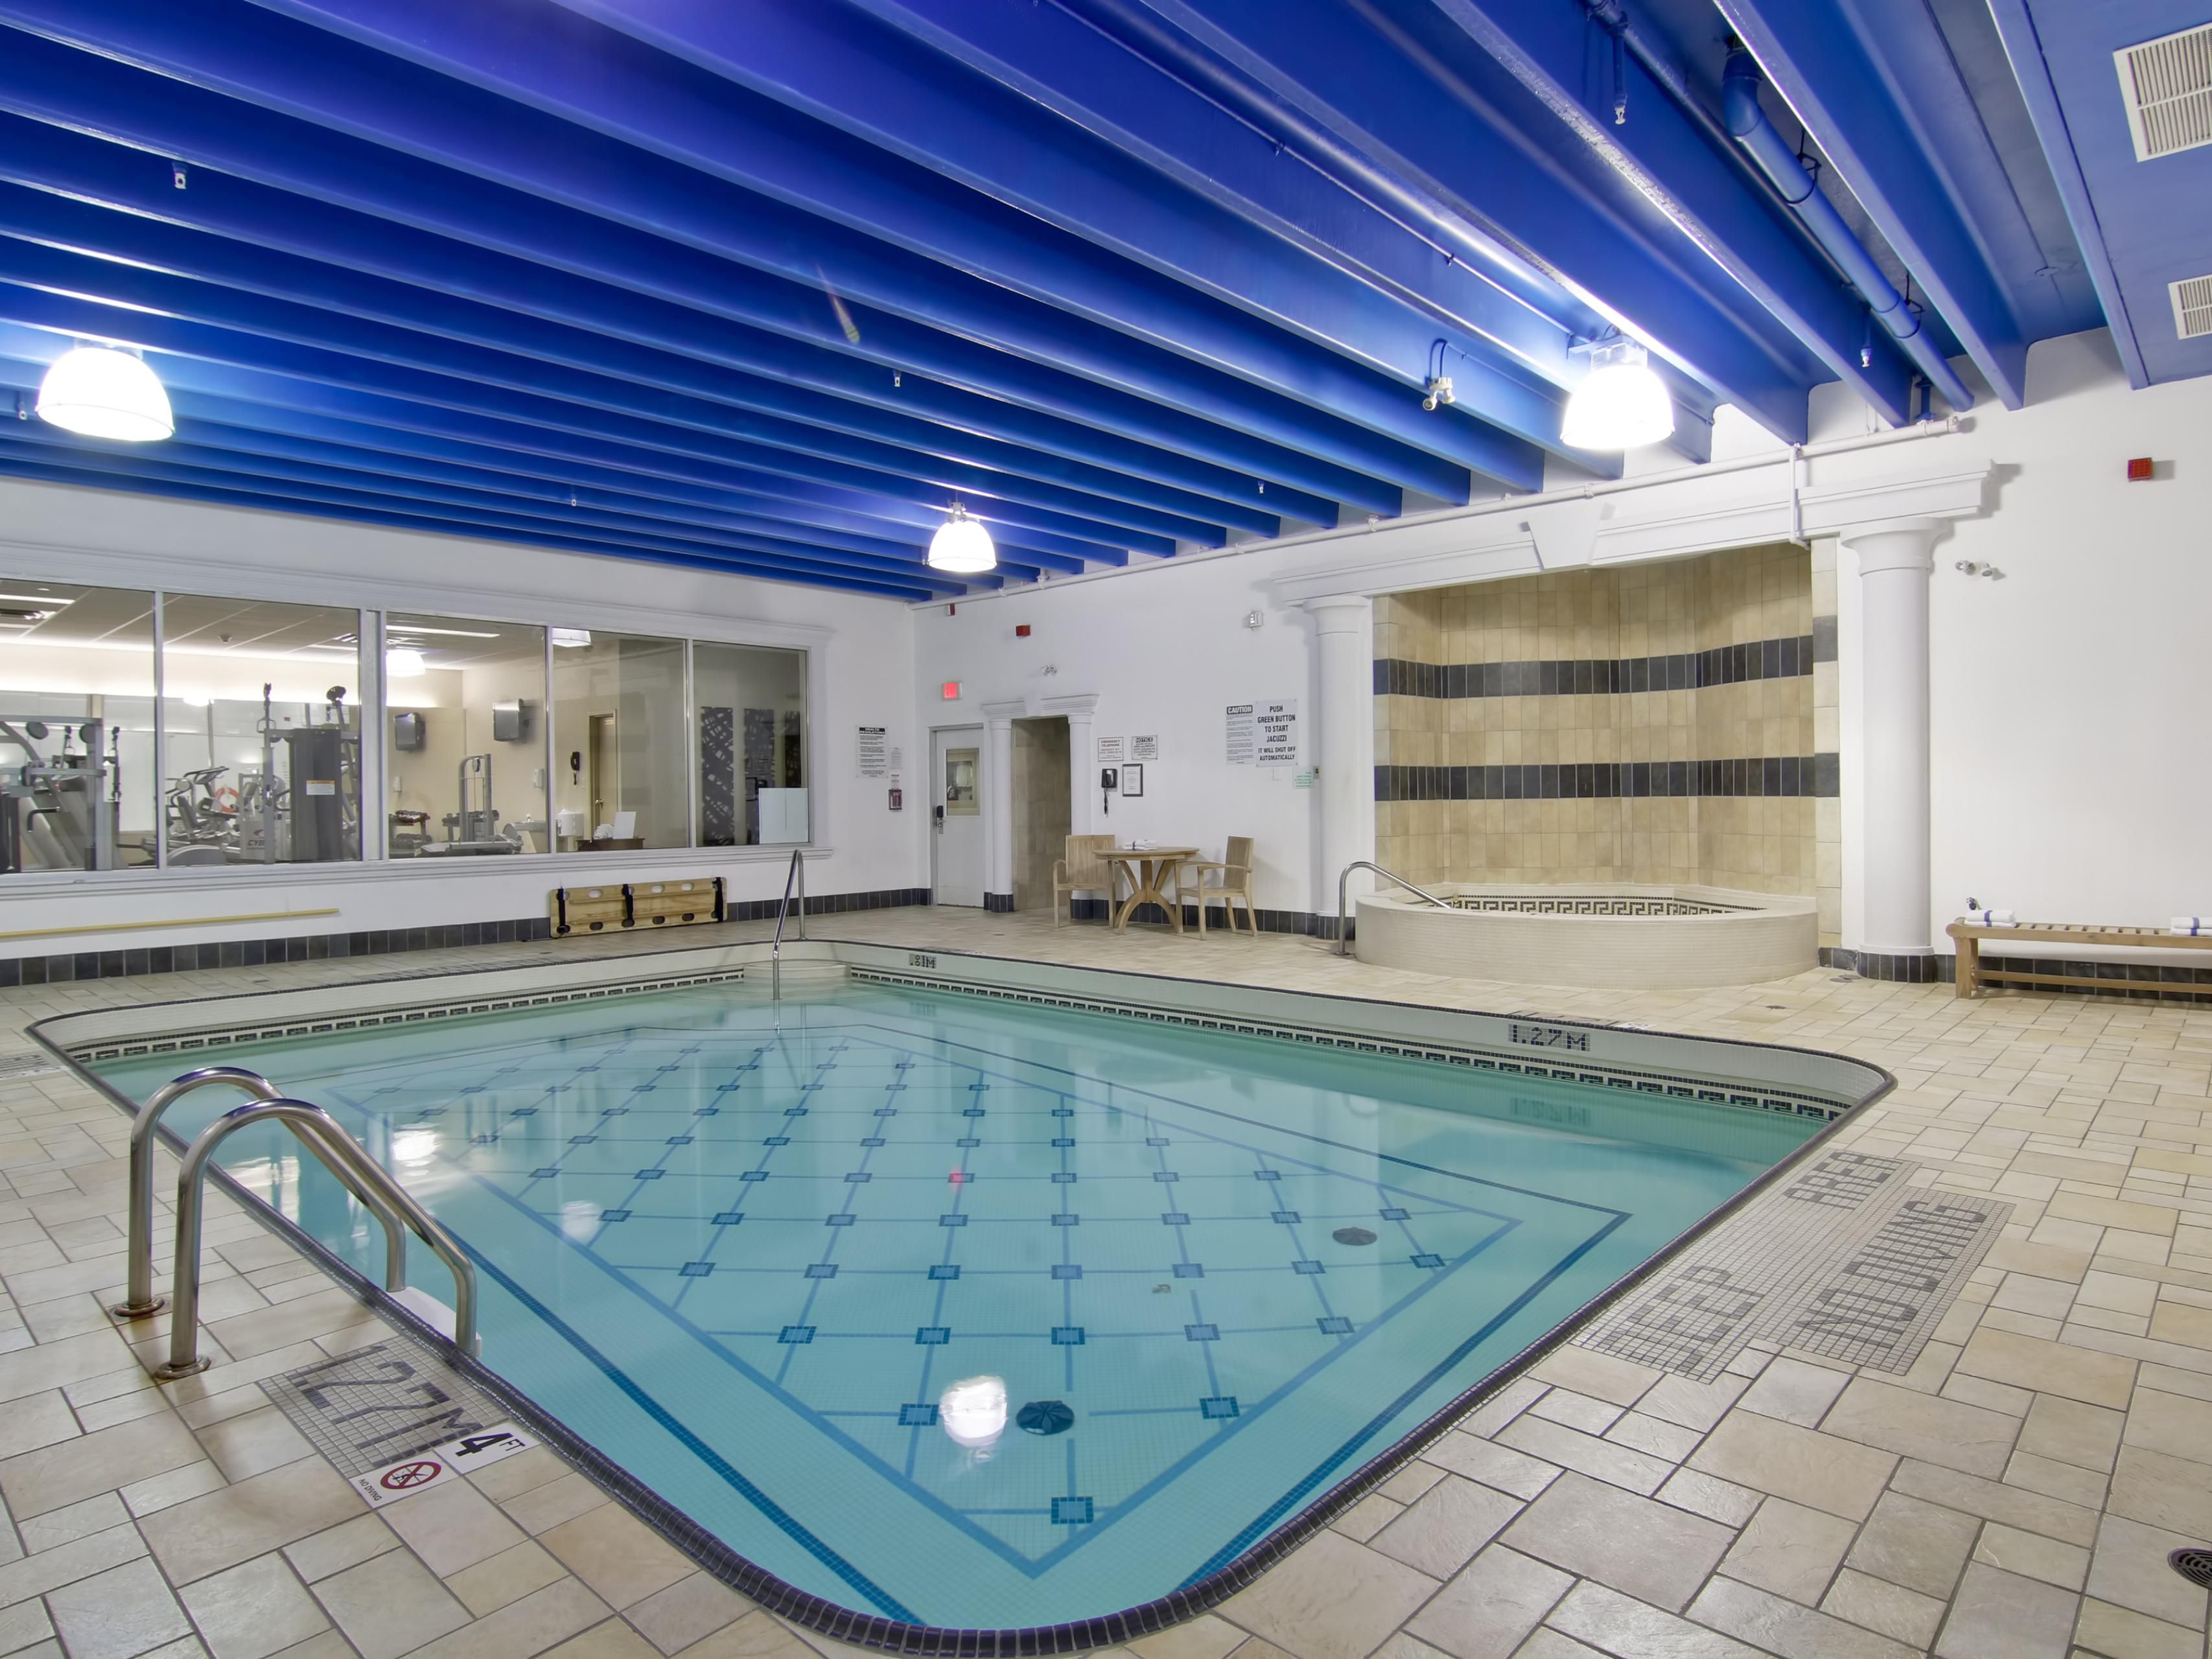 We've got fun for the whole family and the perfect way to unwind after exploring Niagara. Take a dip in our heated indoor saltwater swimming pool. What better way to tire the kids out before you have a great nights' sleep in your guest room!